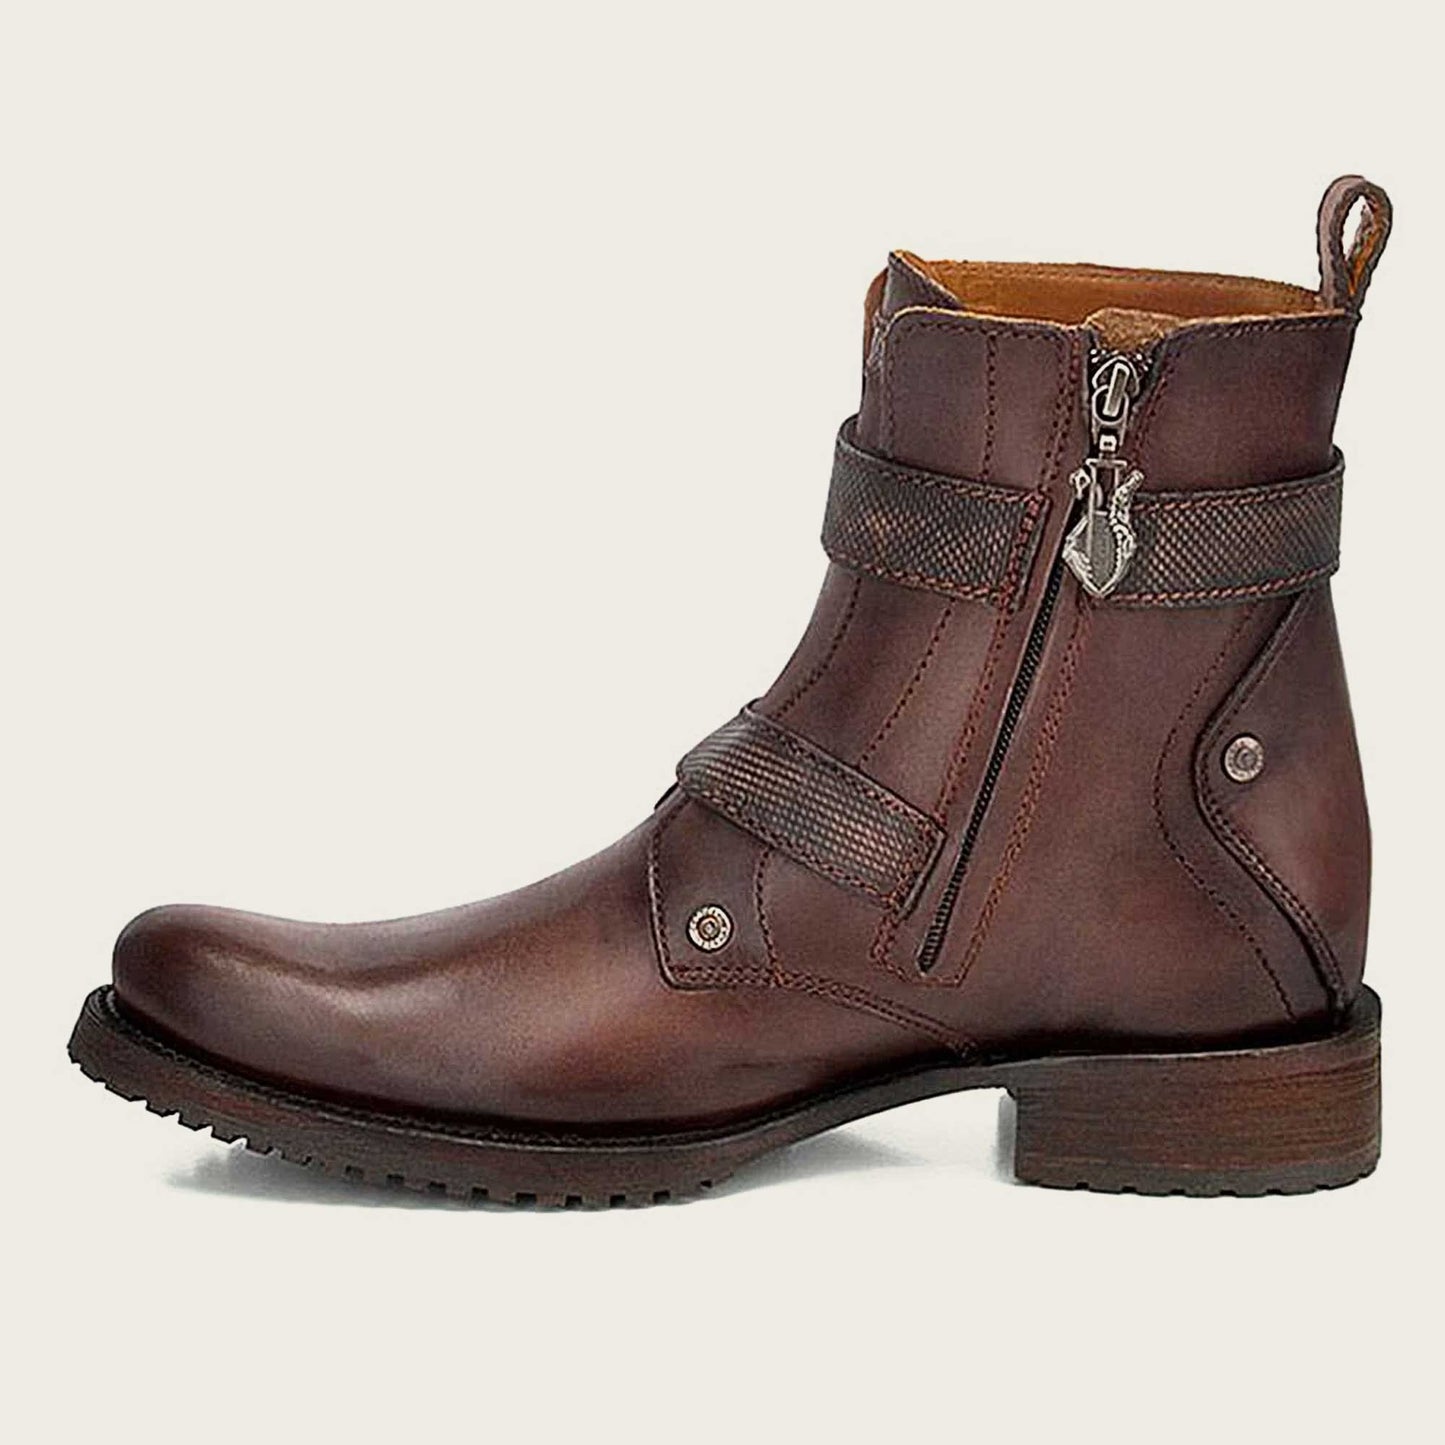 leather ankle brown boots with zipper